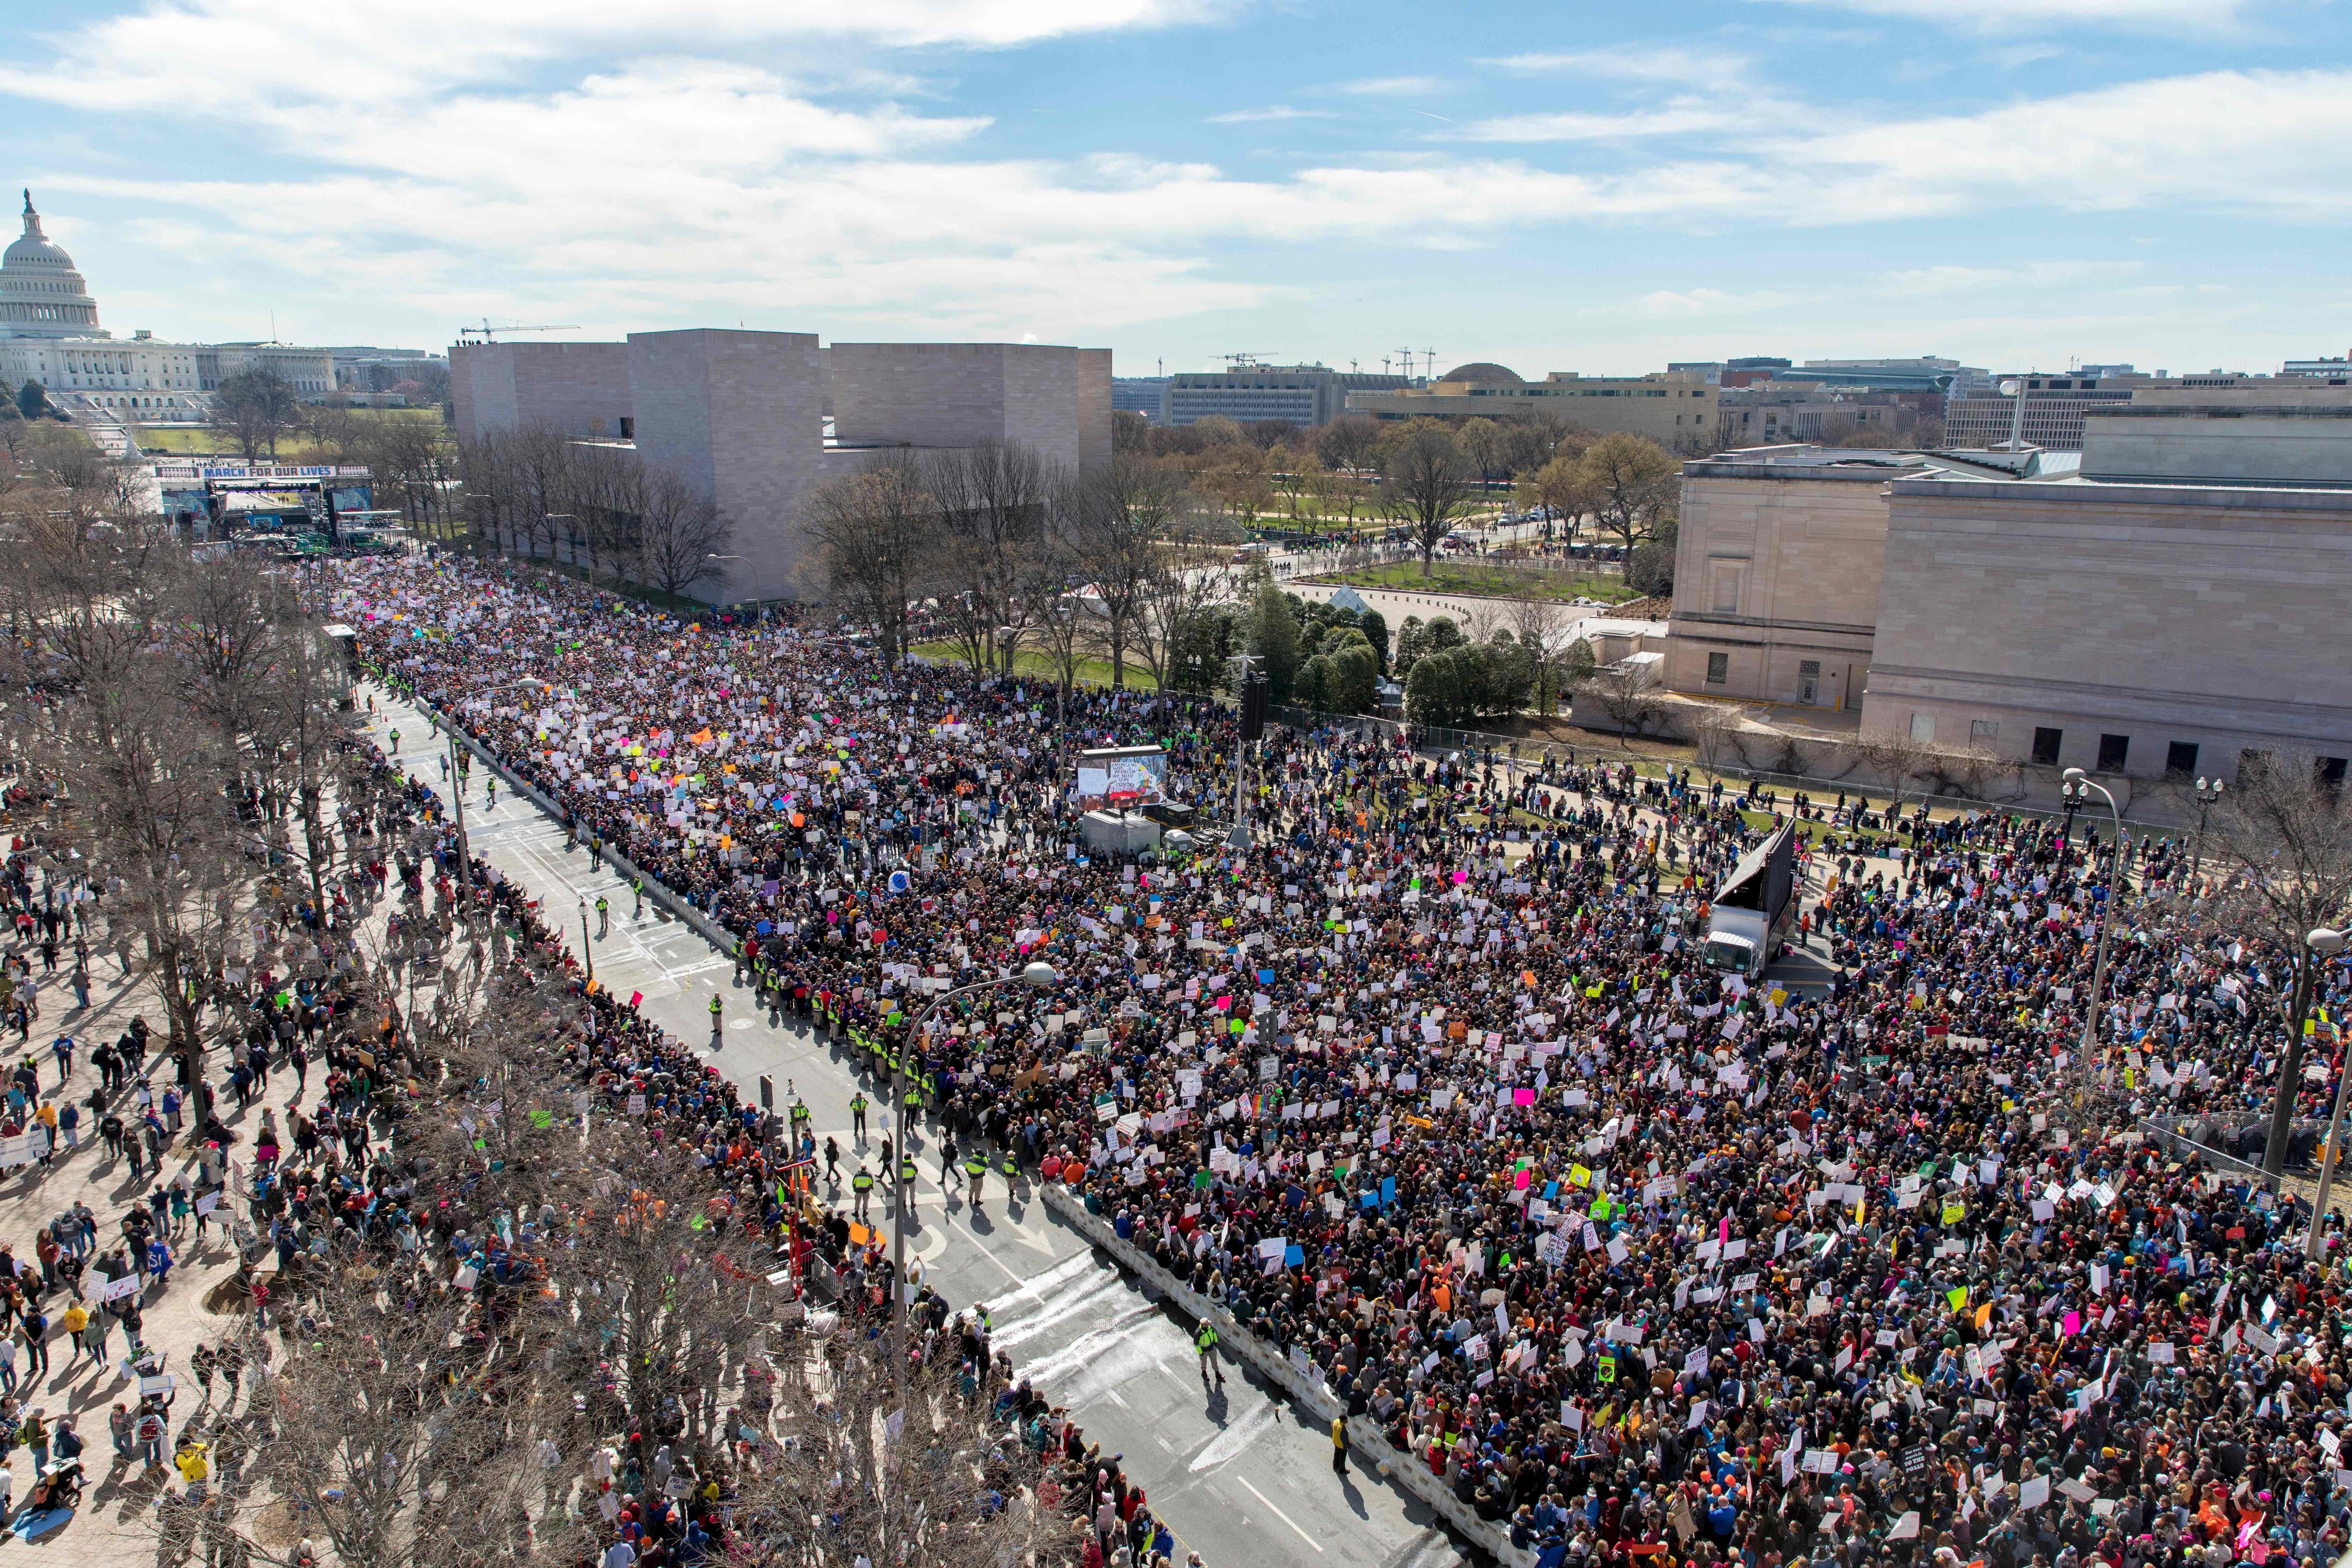 The crowd at the March for Our Lives Rally as seen from the roof of the Newseum in Washington, DC on March 24, 2018. Galvanized by a massacre at a Florida high school, hundreds of thousands of Americans are expected to take to the streets in cities across the United States on Saturday in the biggest protest for gun control in a generation.